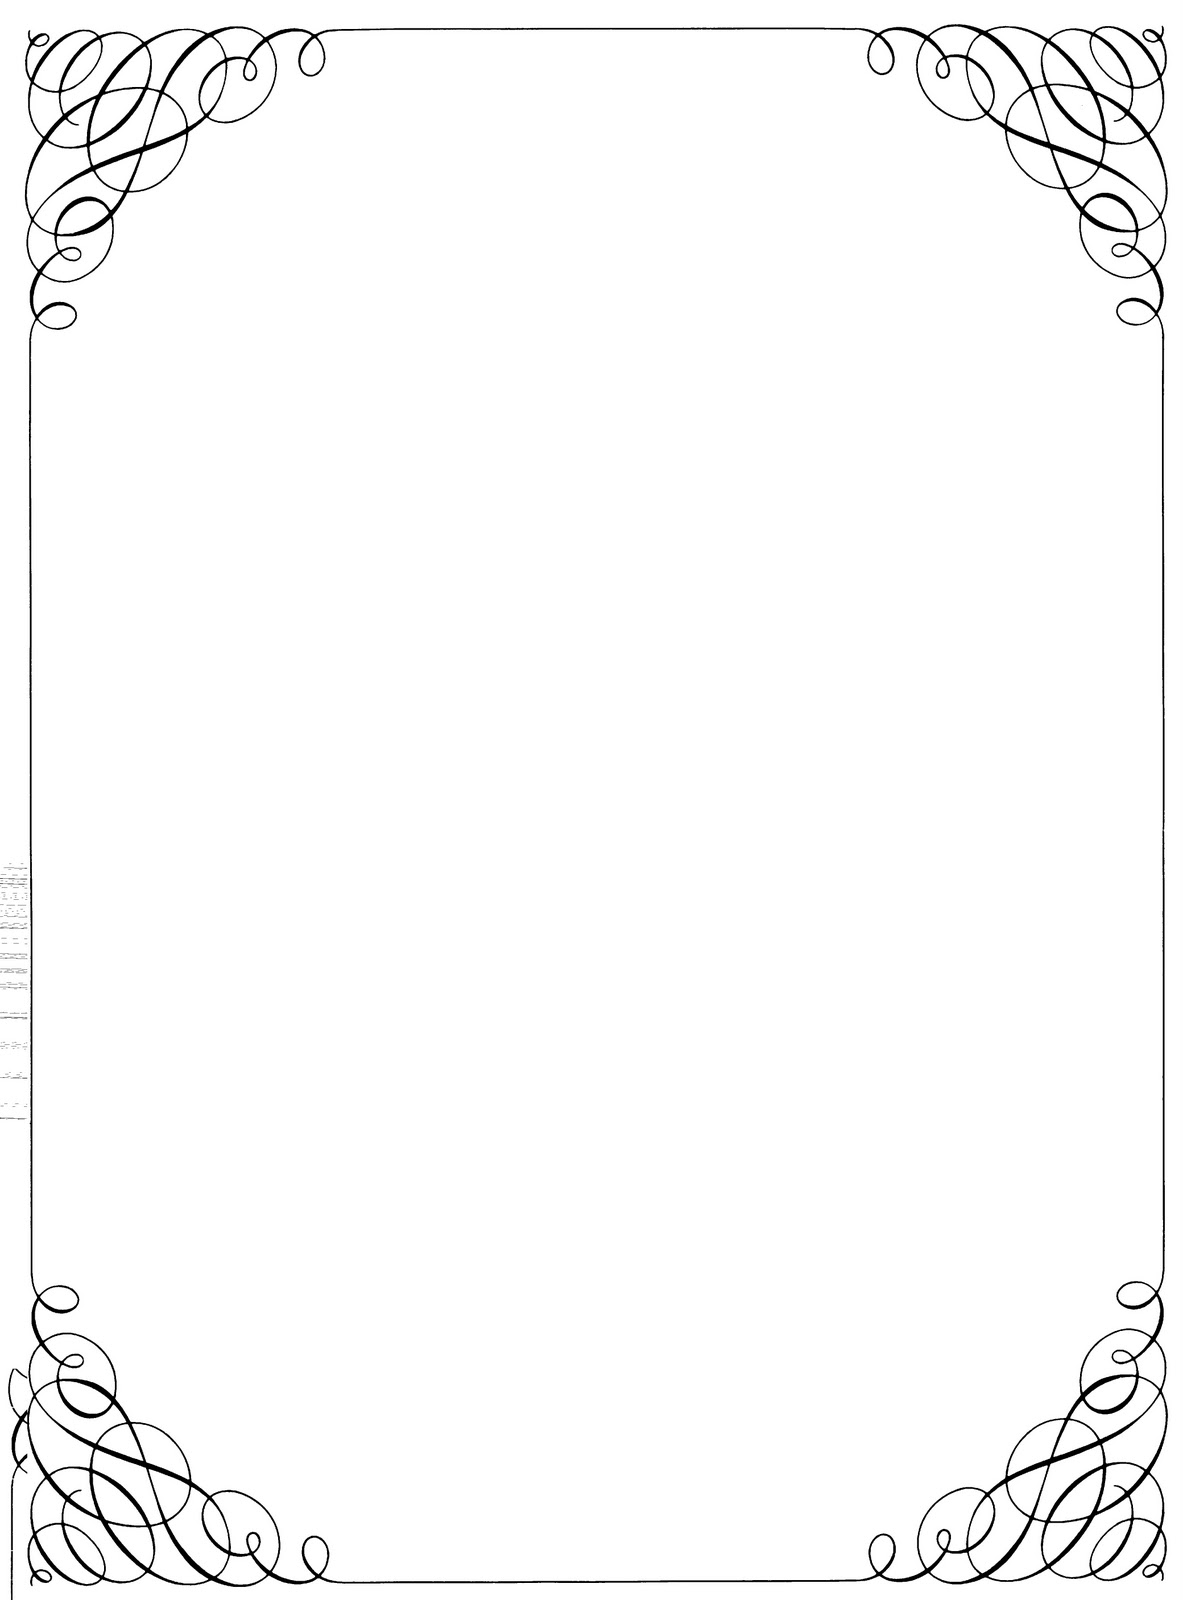 Page Border Templates For Mic - Free Border Clipart